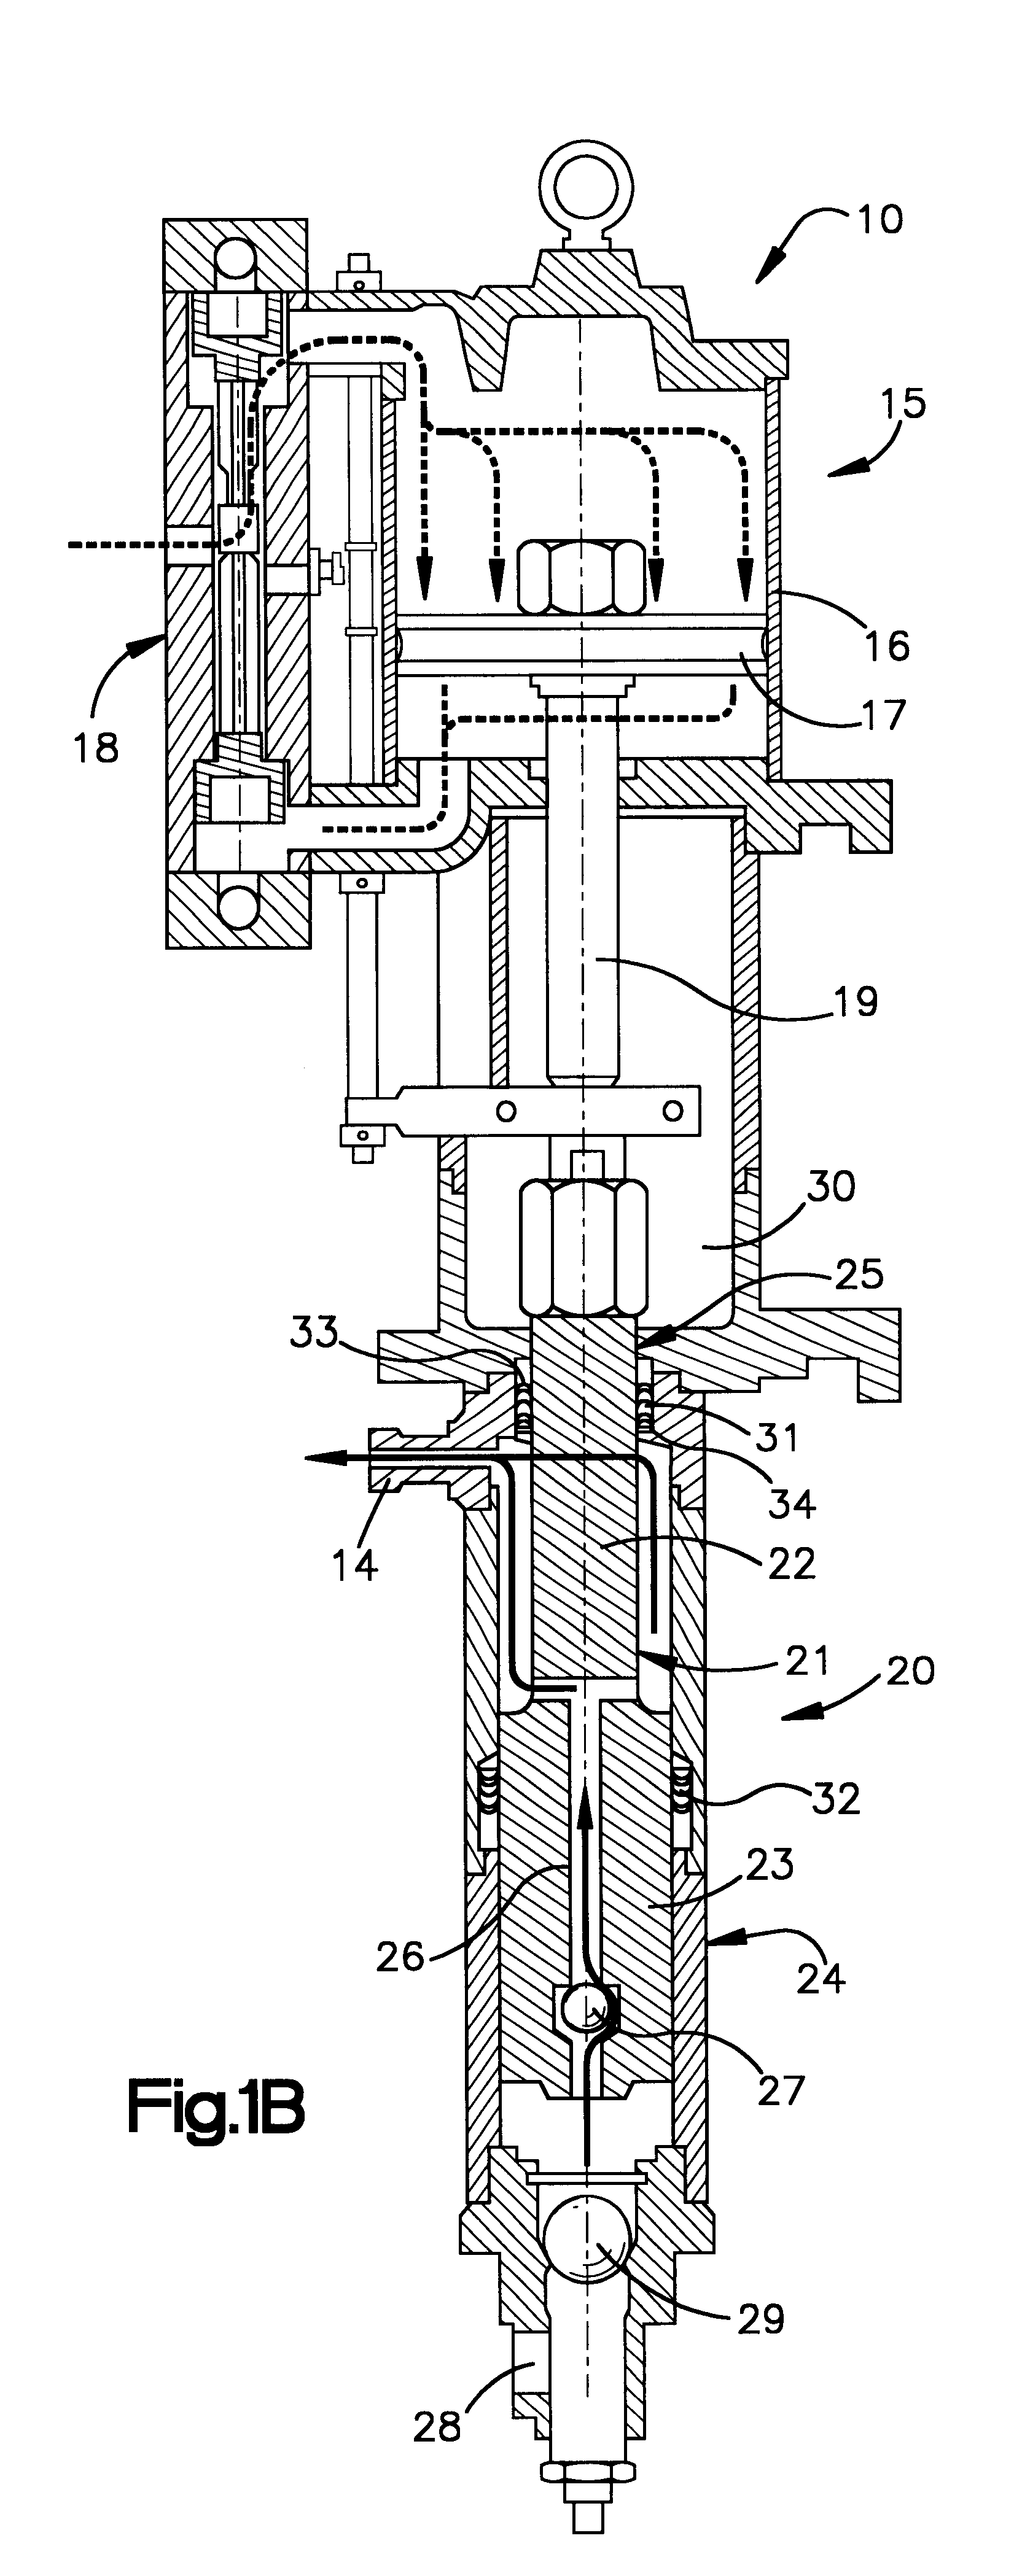 Reciprocating fluid pumps with chromium nitride coated components in contact with non-metallic packing and gasket materials for increased seal life